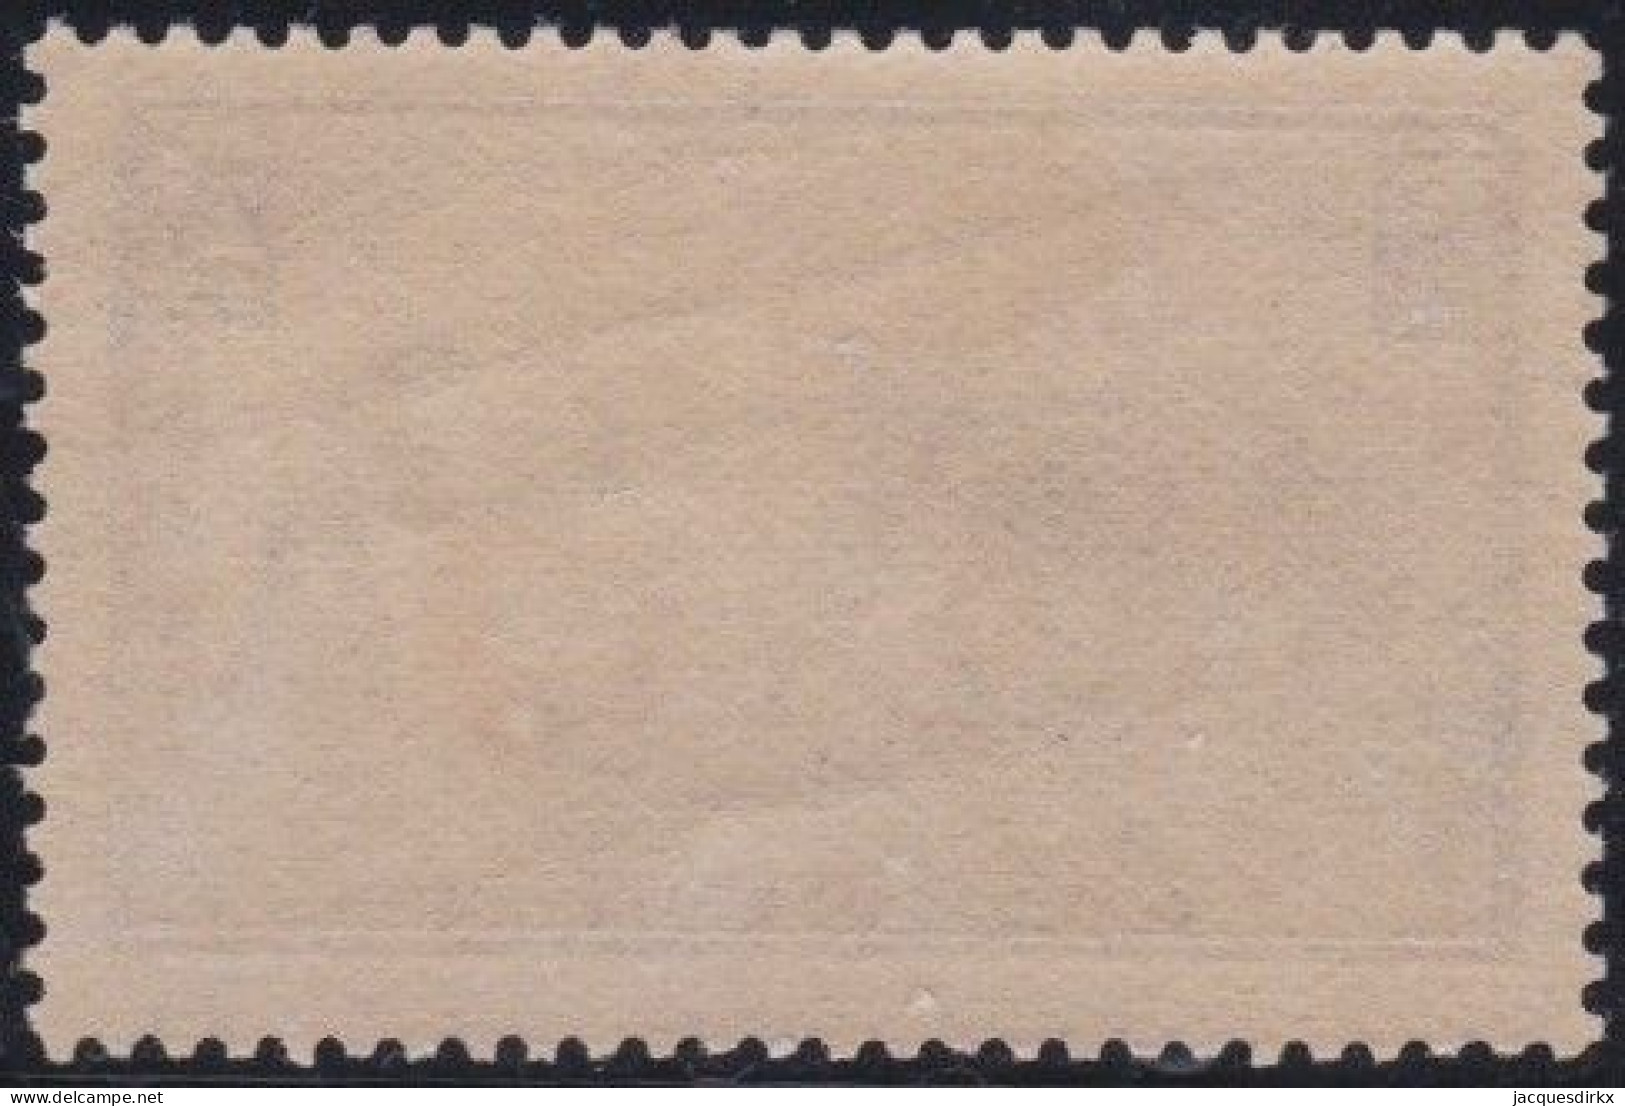 France  .  Y&T   .    Timbre (2 Scans)  .  Besetzses Gebiet     .   *     .    Neuf Avec Gomme - War Stamps